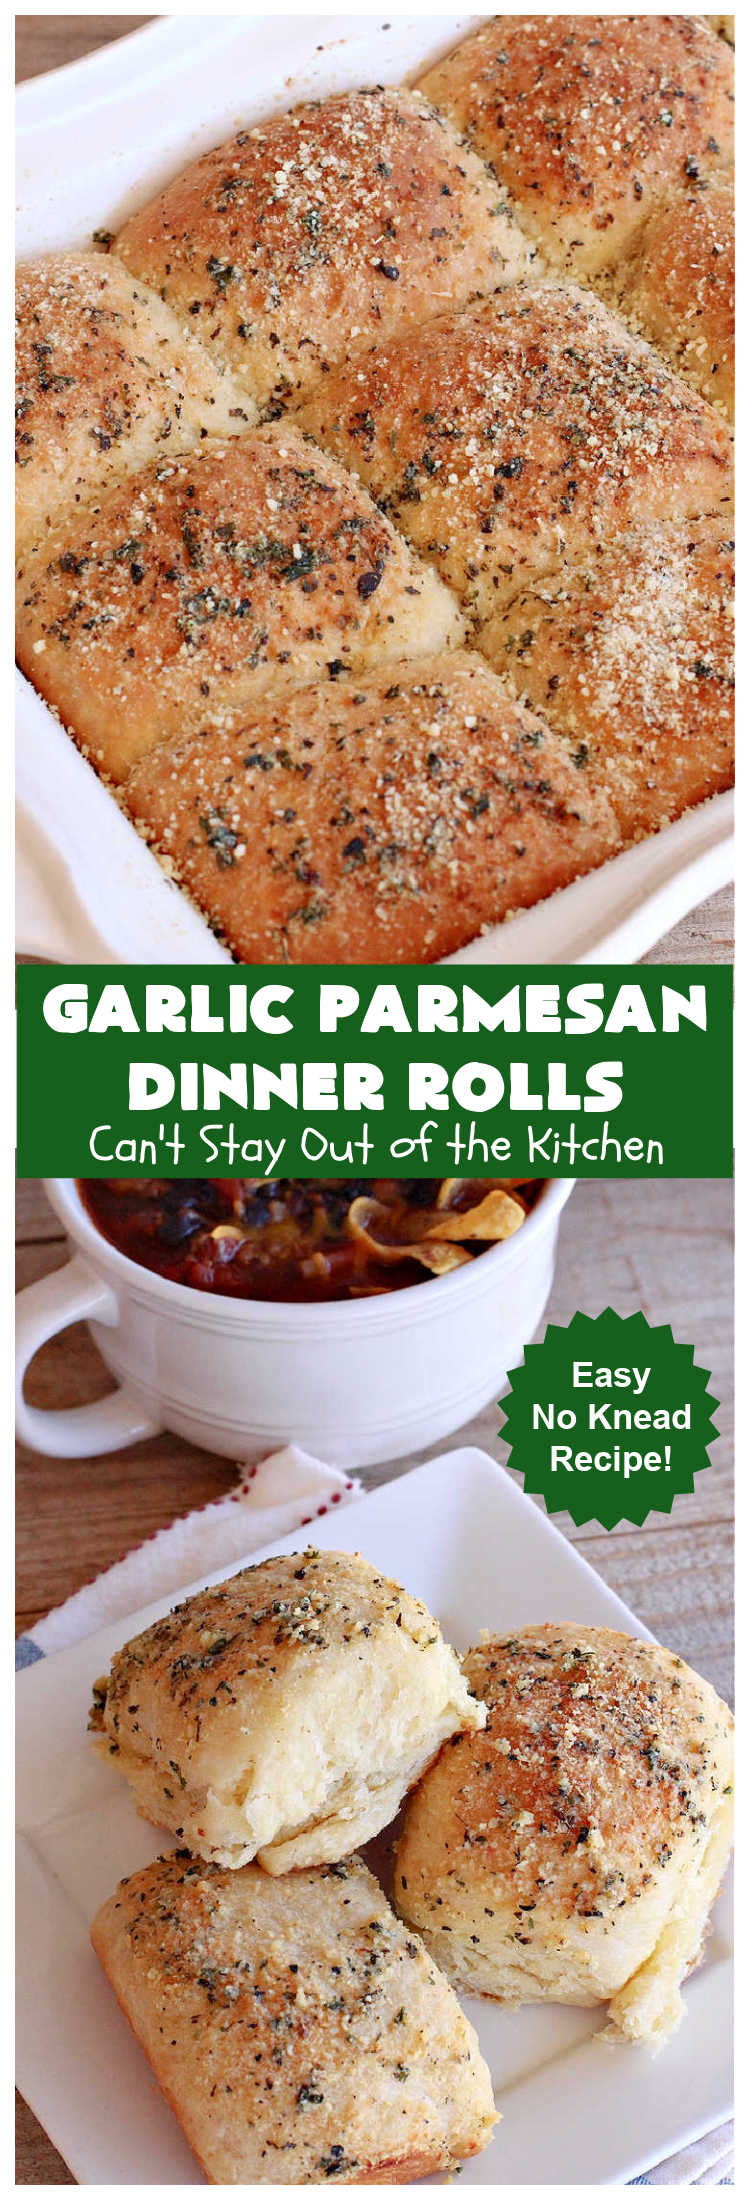 Garlic Parmesan Dinner Rolls | Can't Stay Out of the Kitchen